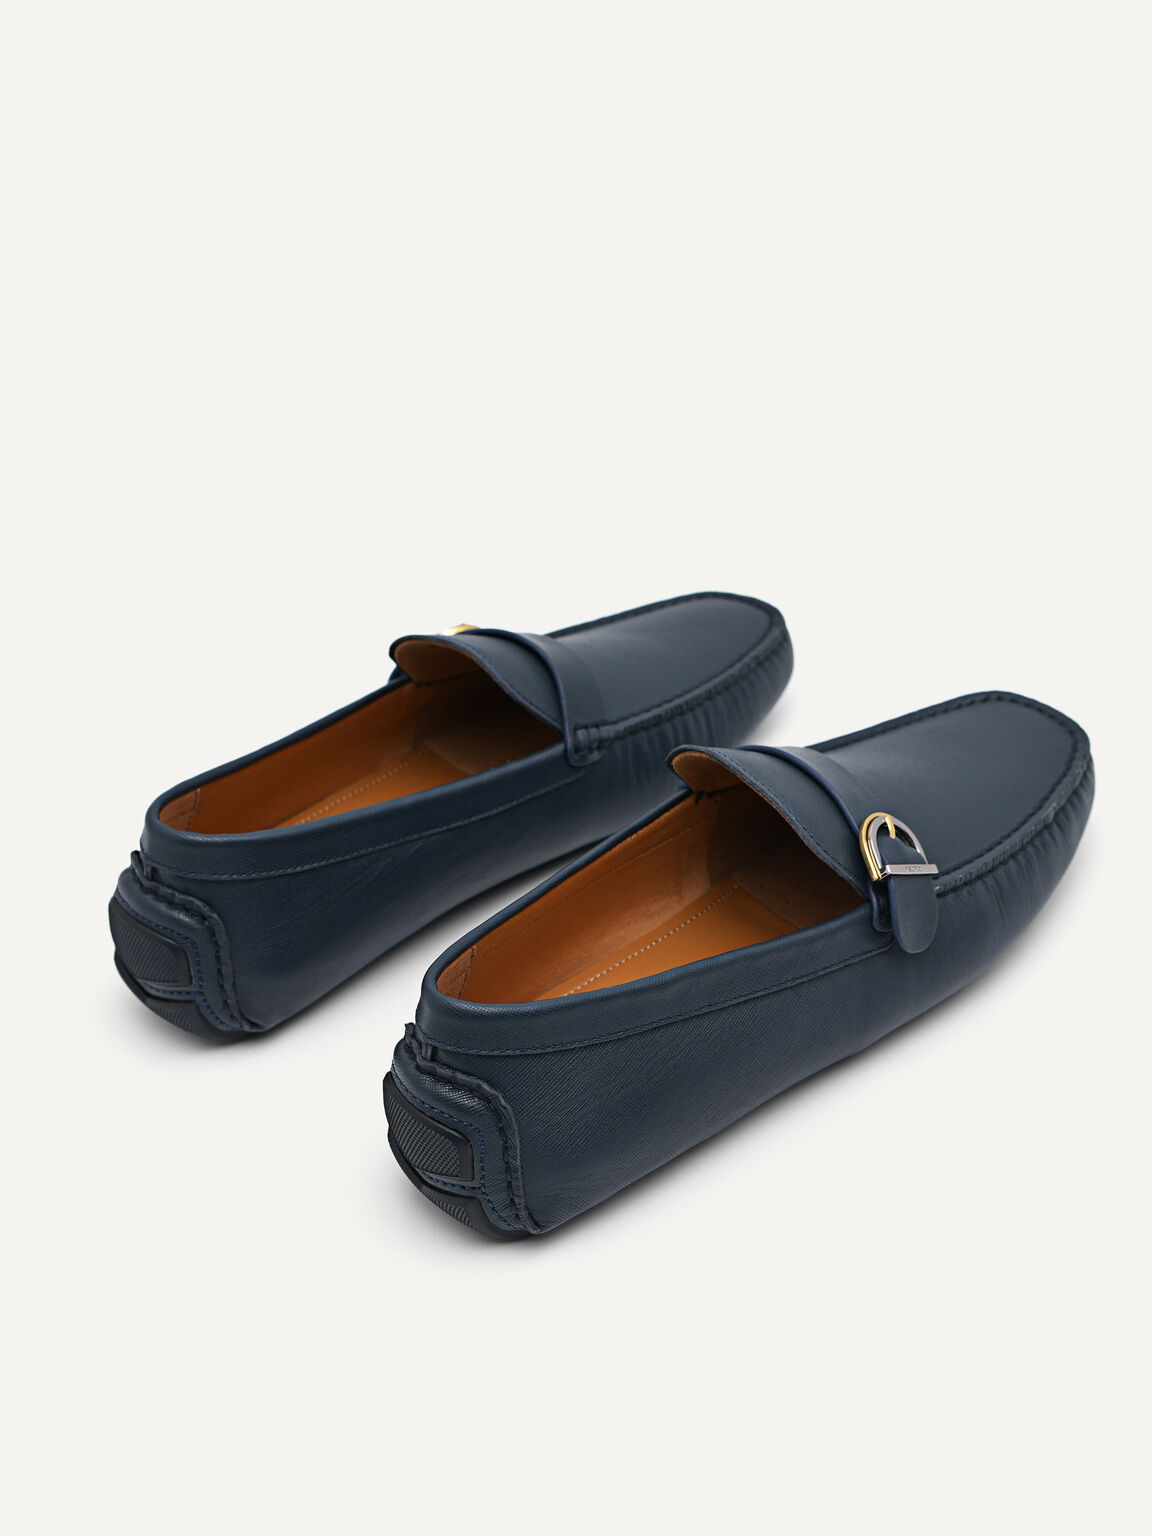 Leather Moccasins with Buckle Detail, Navy